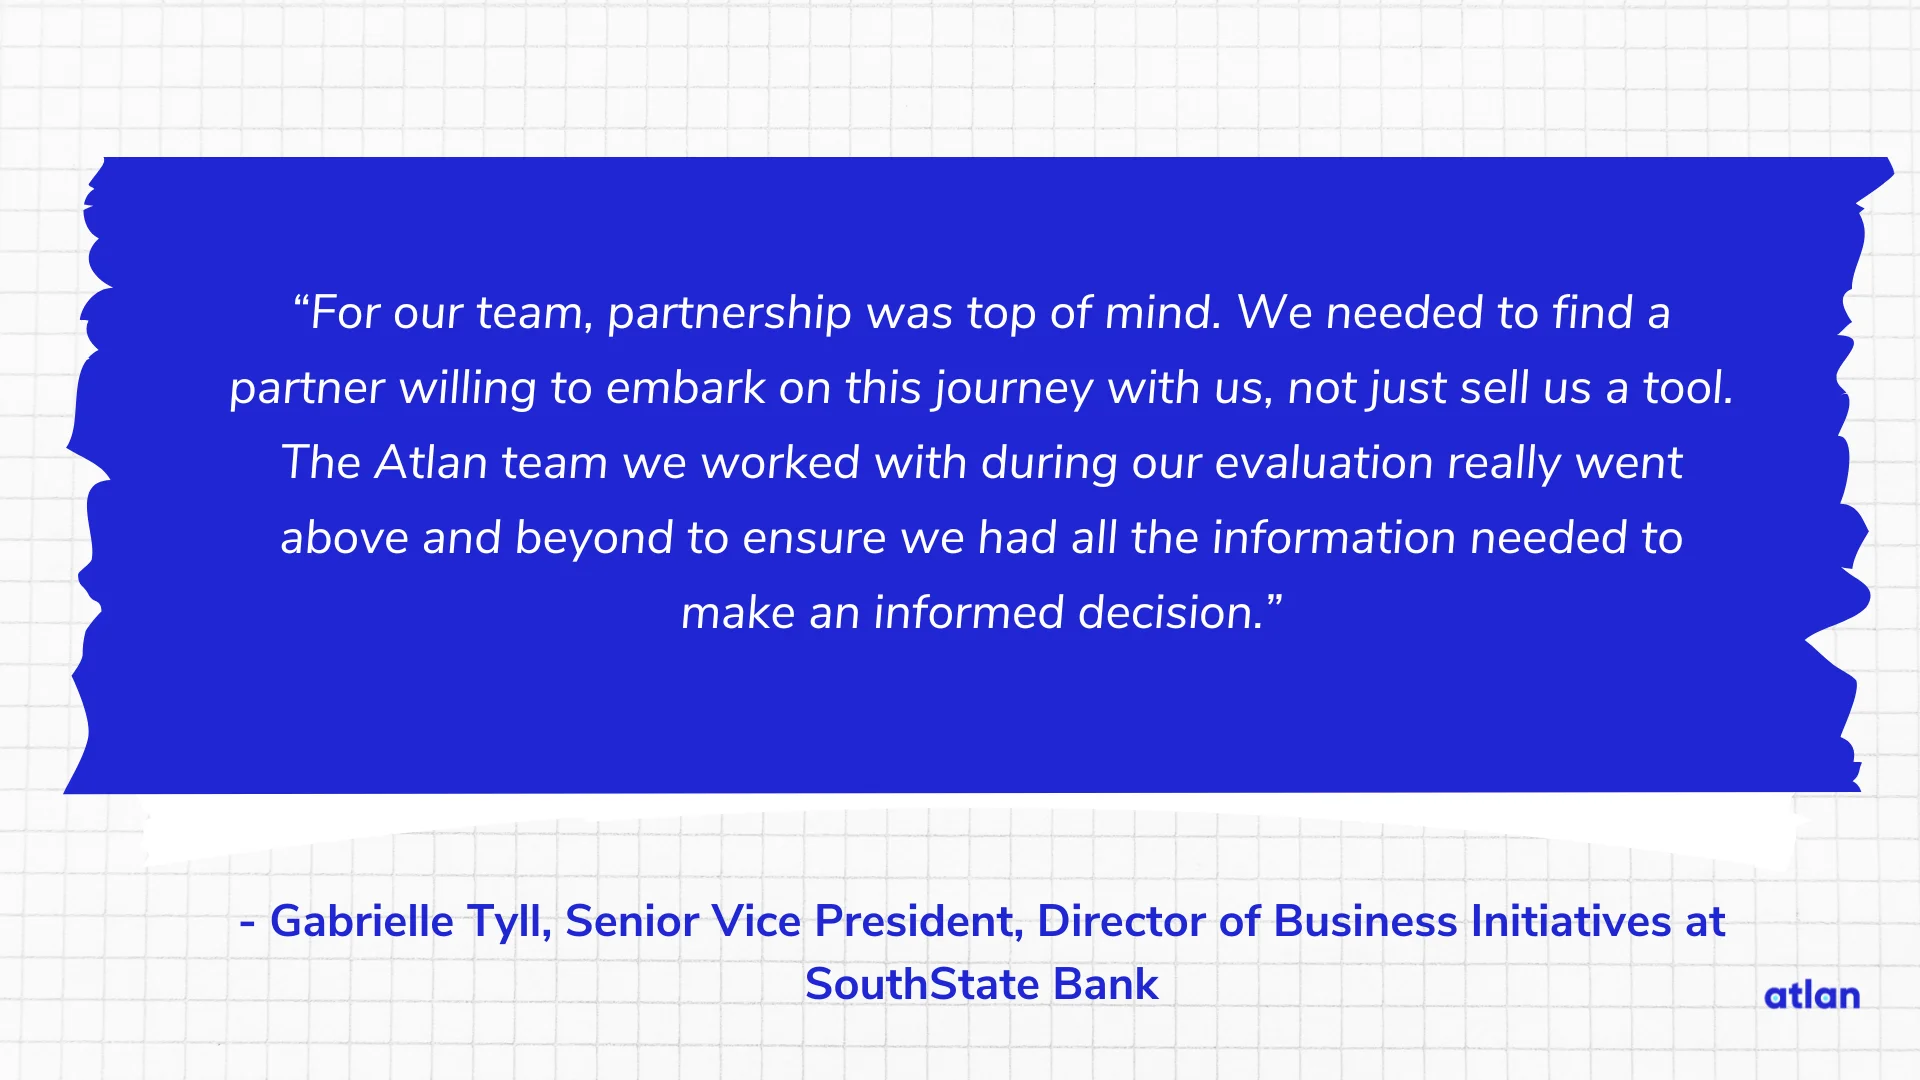 how SouthState Bank benefited from adopting Atlan as a partner addressing their unique needs